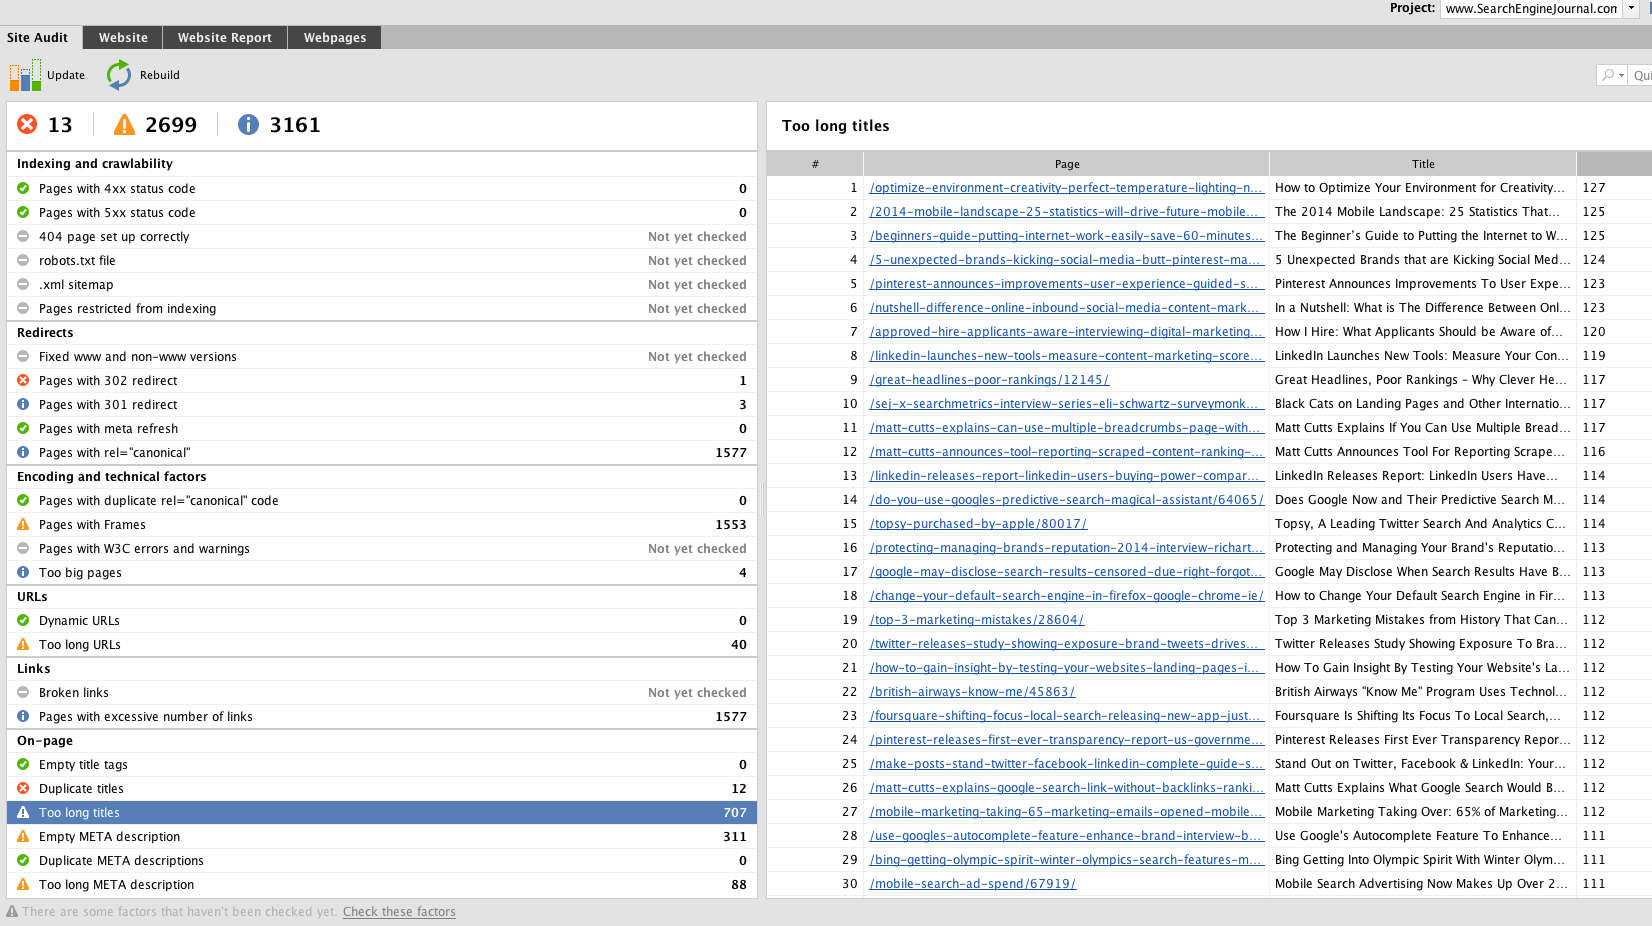 How to Perform Expert Content Research Using The Ahrefs Content Explorer